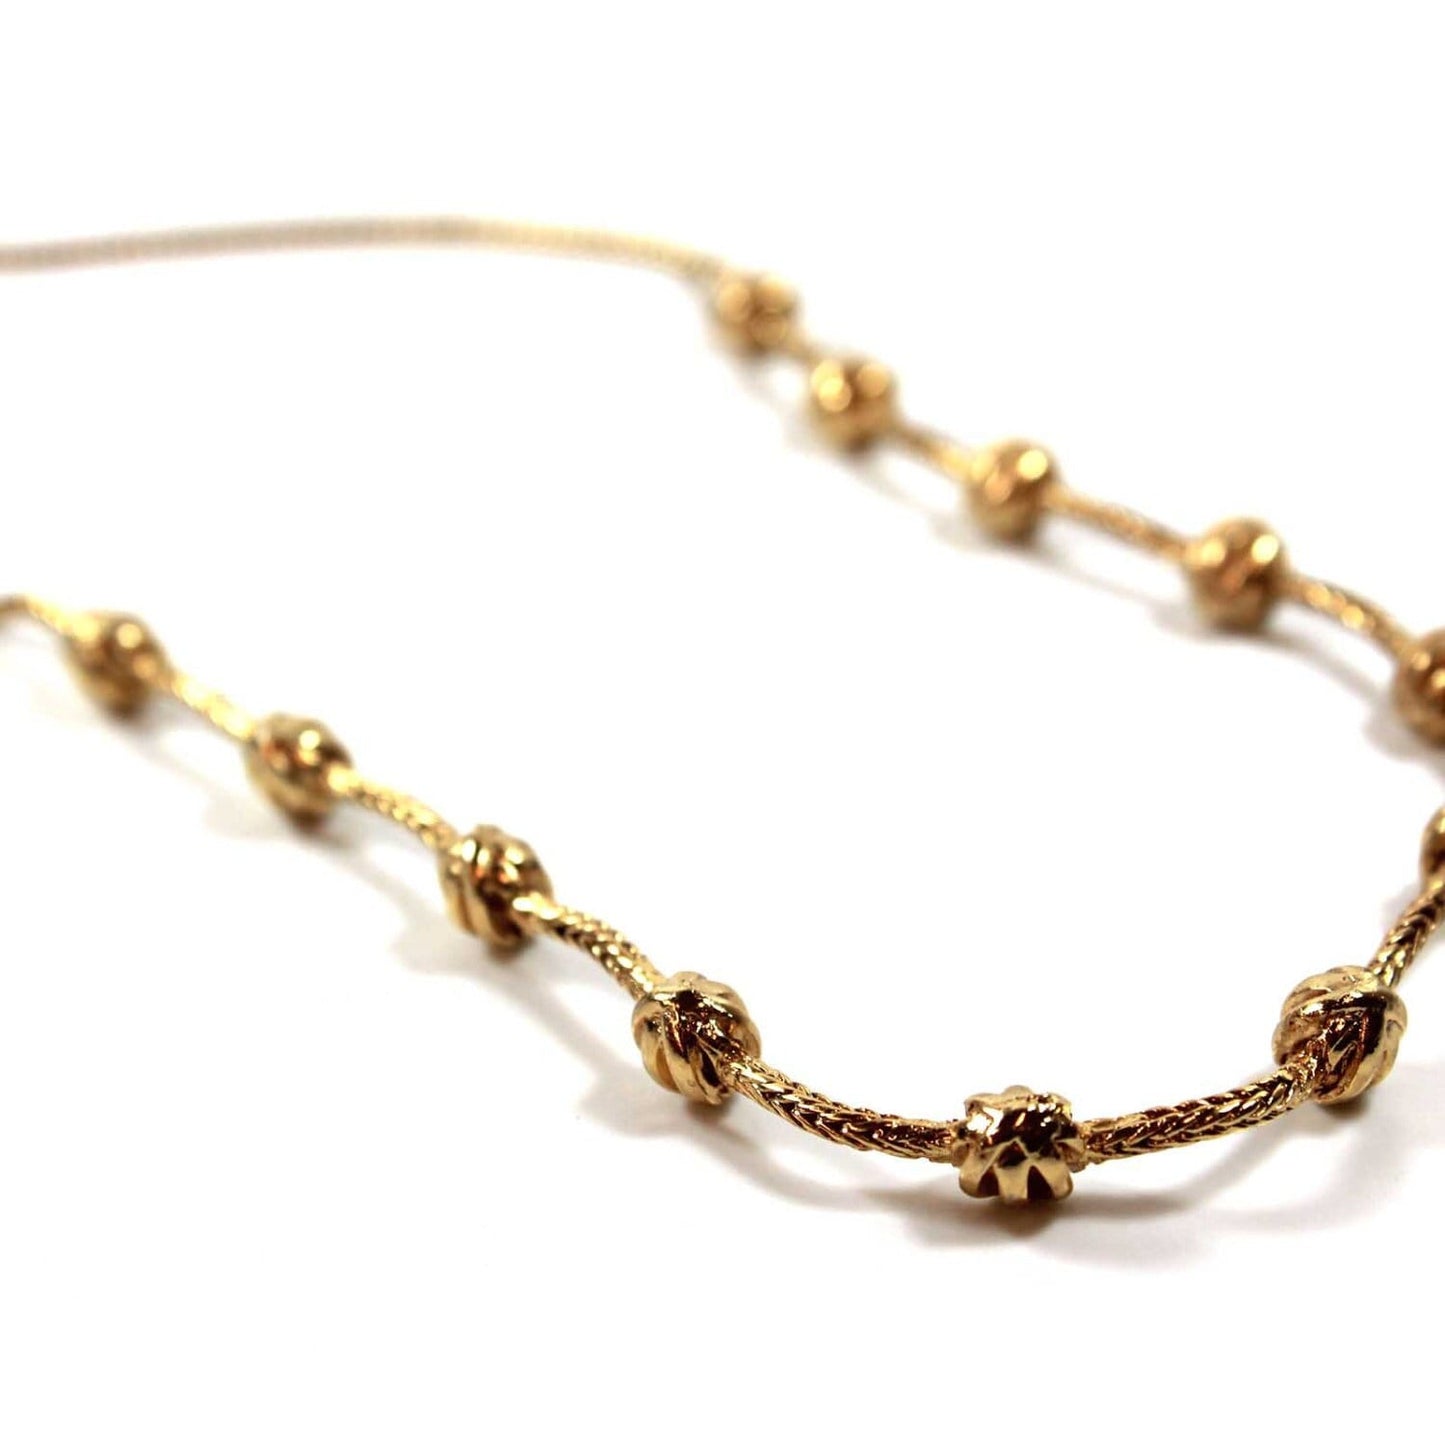 Vintage Oscar De La Renta 17in Gold Tone Beaded Wheat Chain Necklace Toggle Clasp Antique Womans #OS110